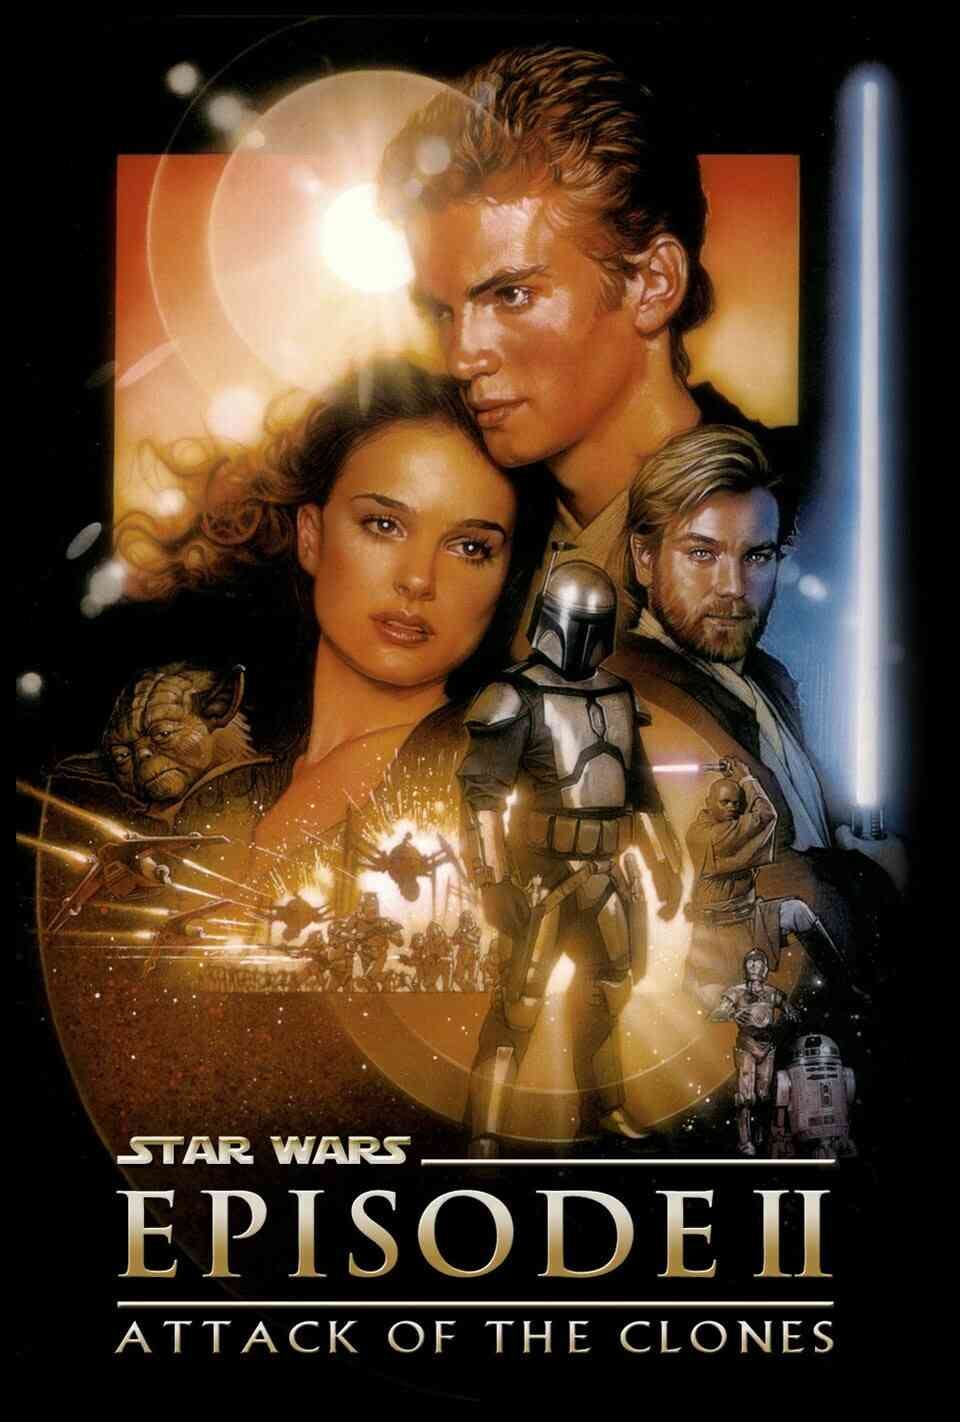 Read Episode II - Attack of the Clones screenplay (poster)